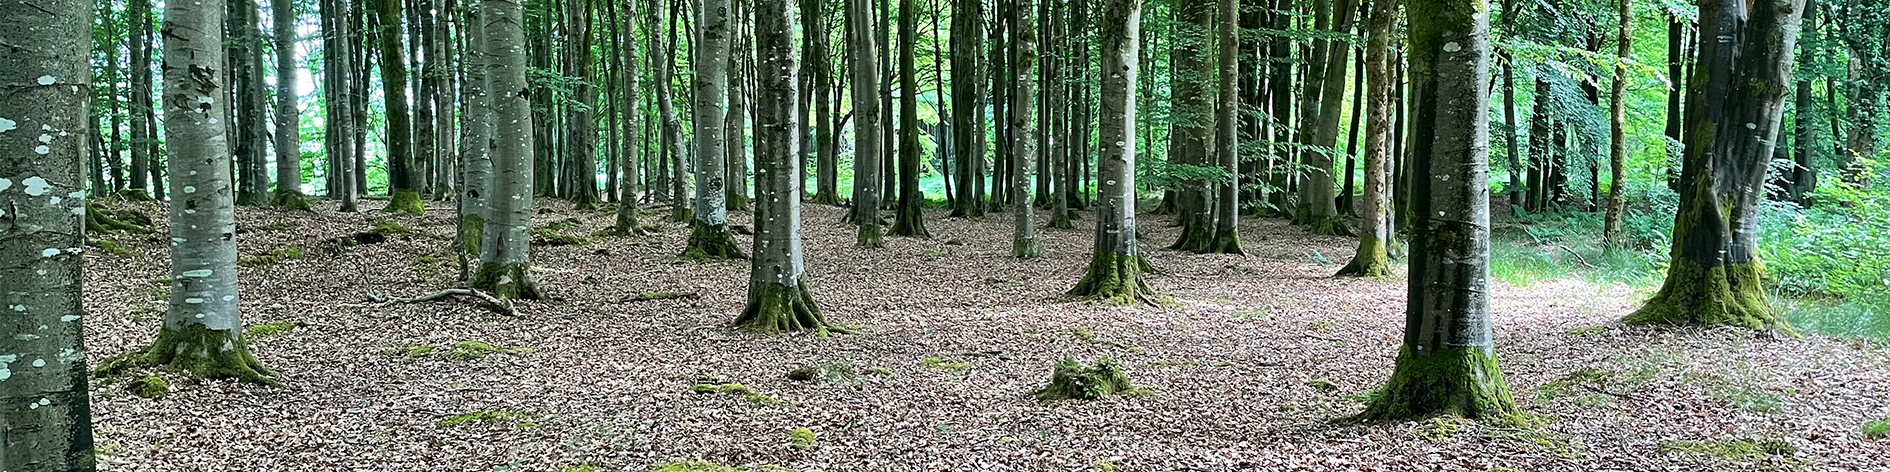 A wide panoramic image of a beech forest floor. The trees are straight and uniform. There is a carpet of leaf matter but not much other ground level vegetation.